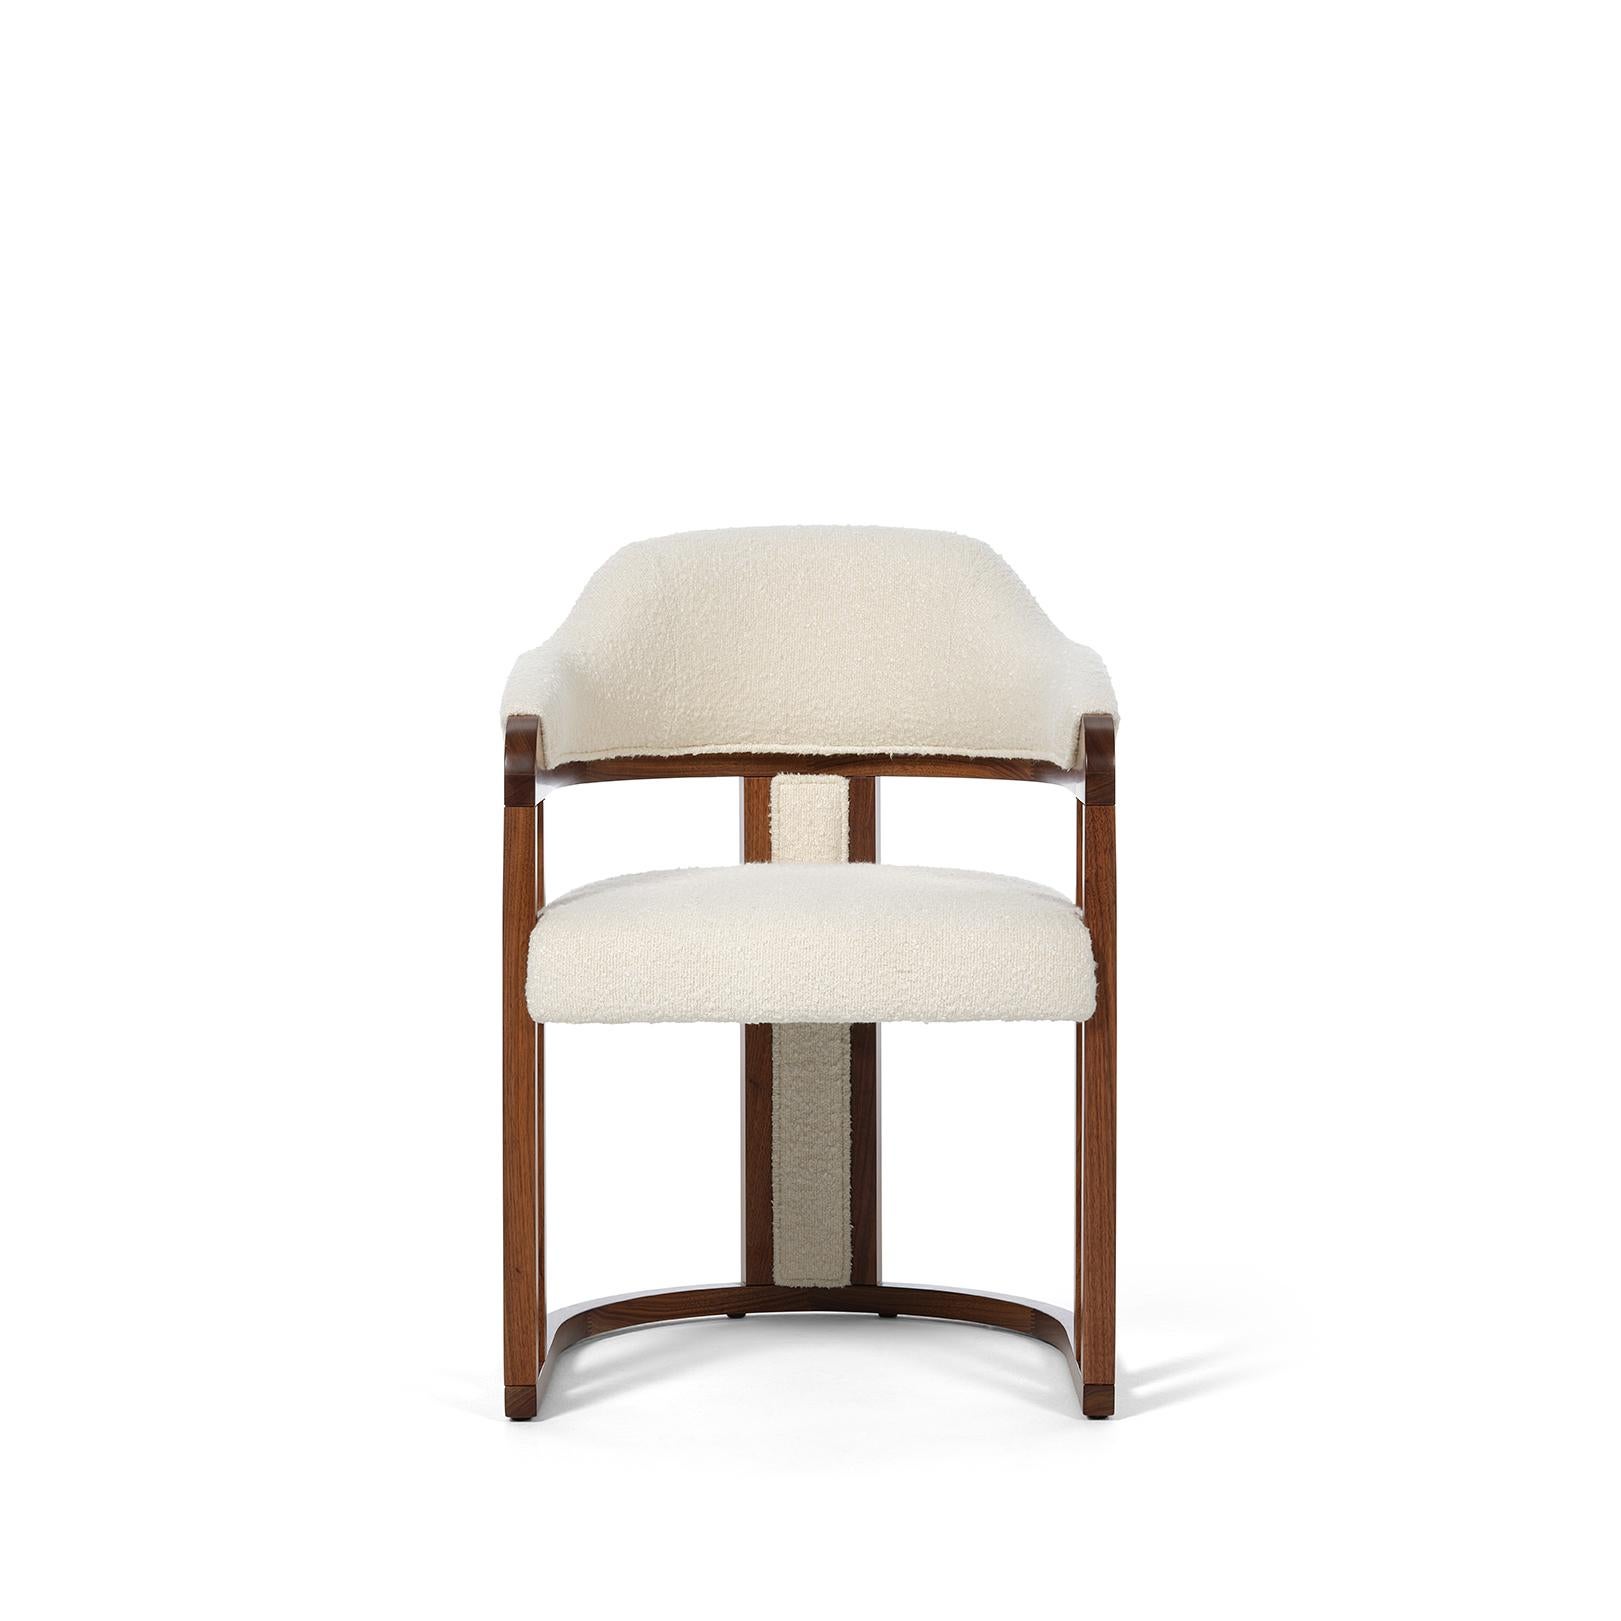 The Grace dare dining chair is made of a solid wood structure, whose nature is proudly assumed in its rounded shape. Also available in lacquer finish in custom colors.
The seat and the back detail can be upholstered in any fabric, eco-leather or